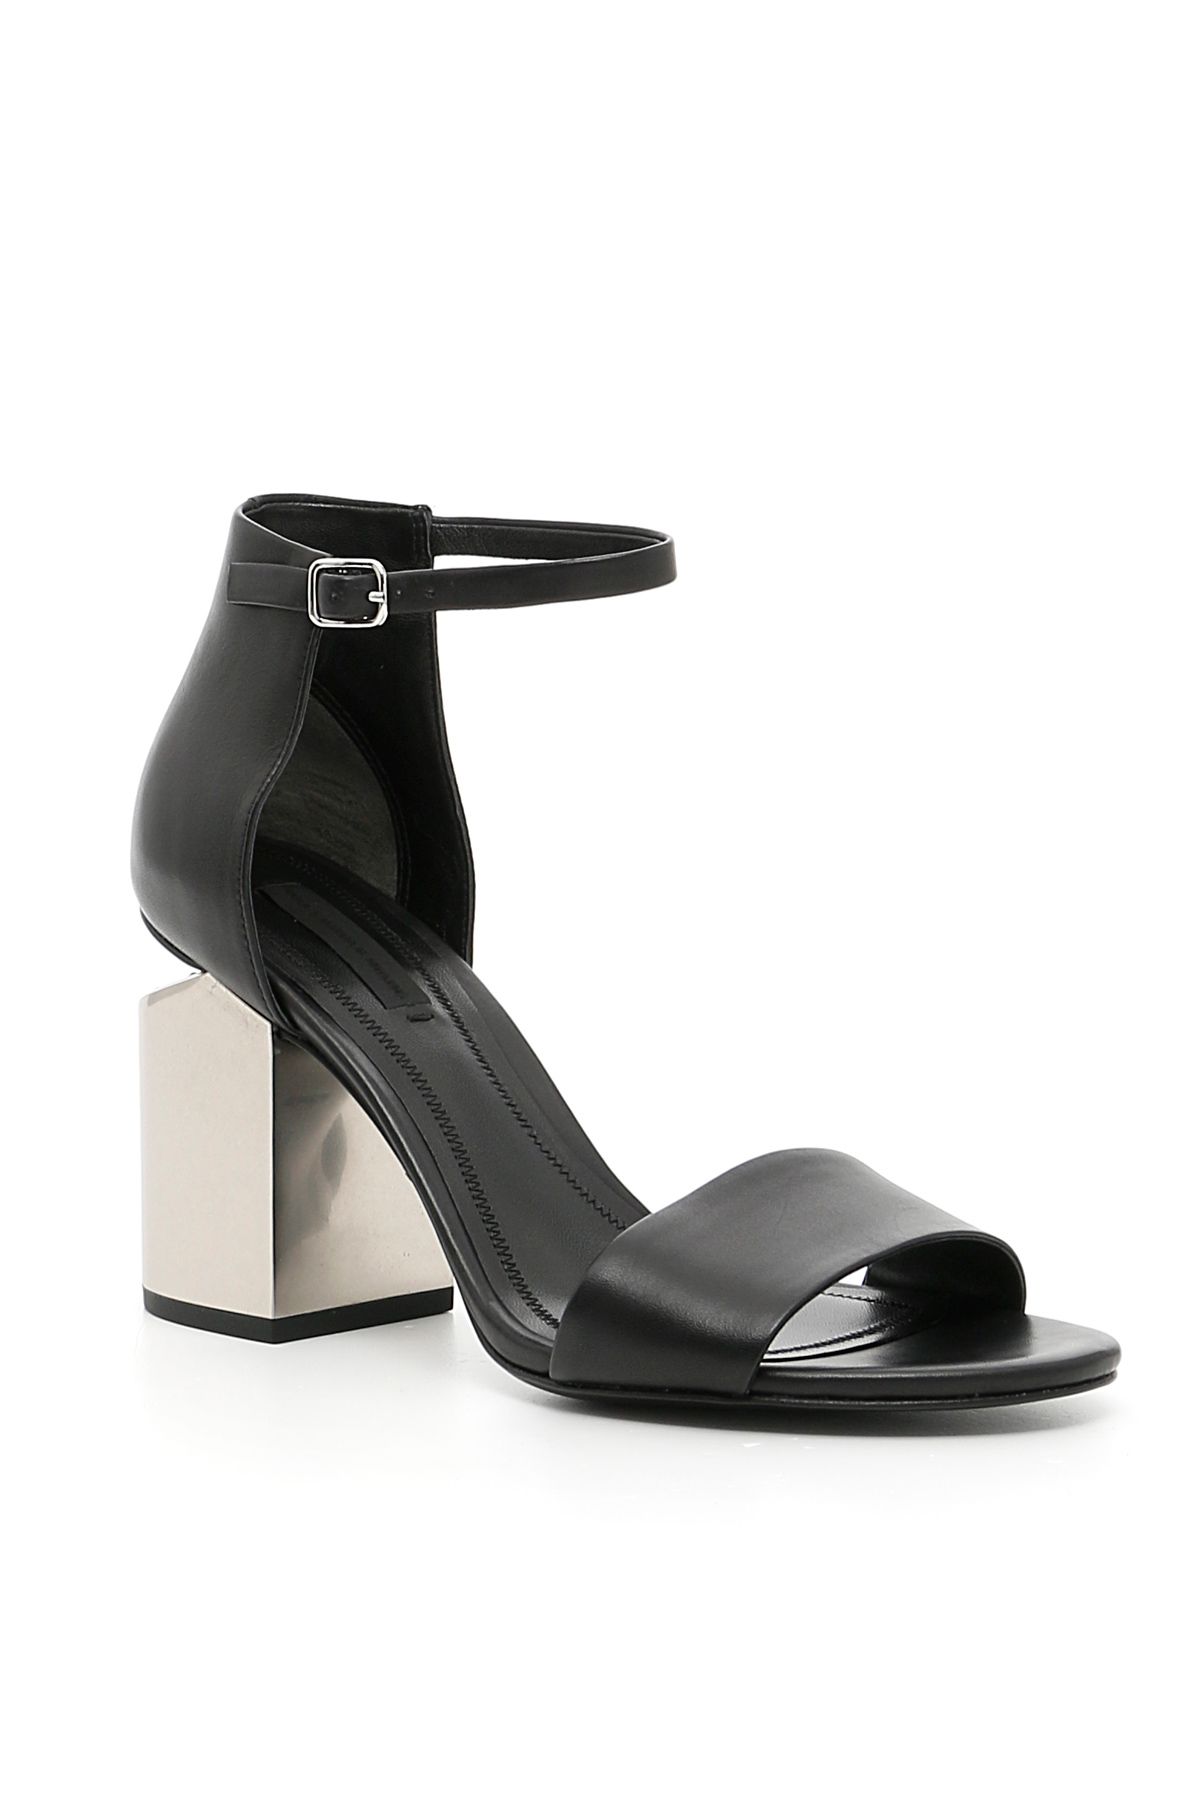 ALEXANDER WANG Abby Leather Sandals in Black | ModeSens